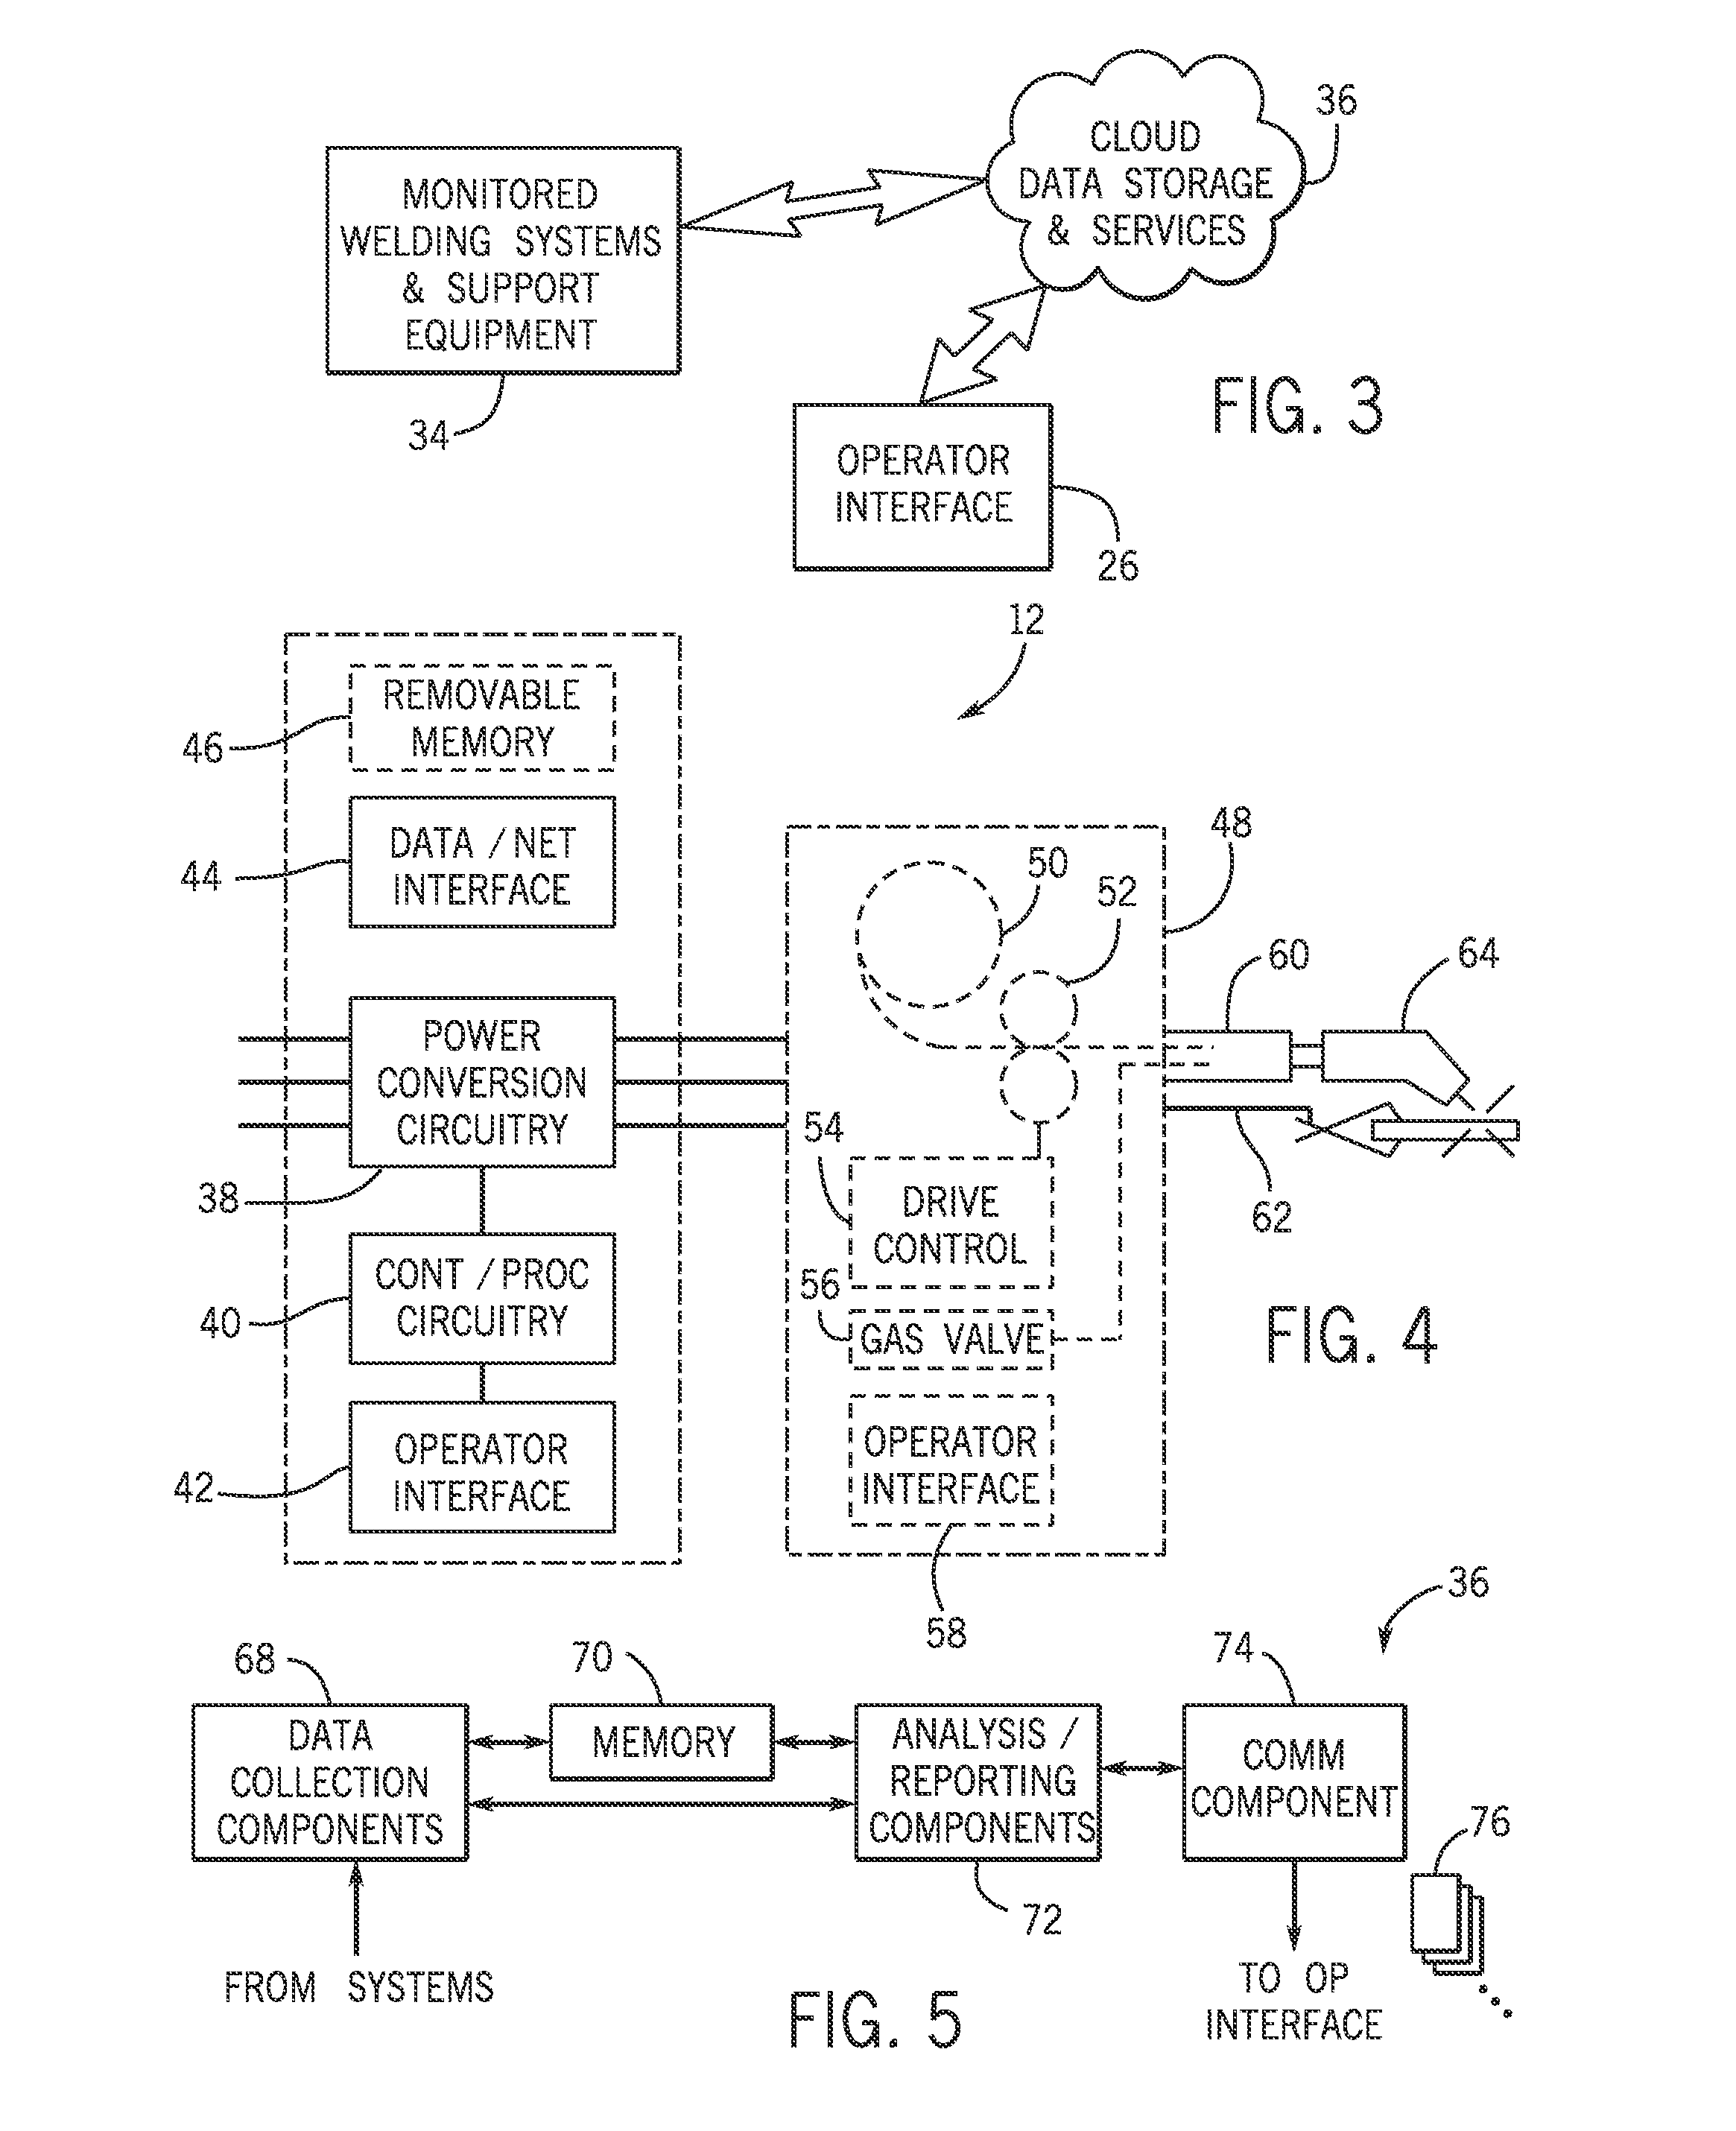 Welding resource tracking and analysis system and method